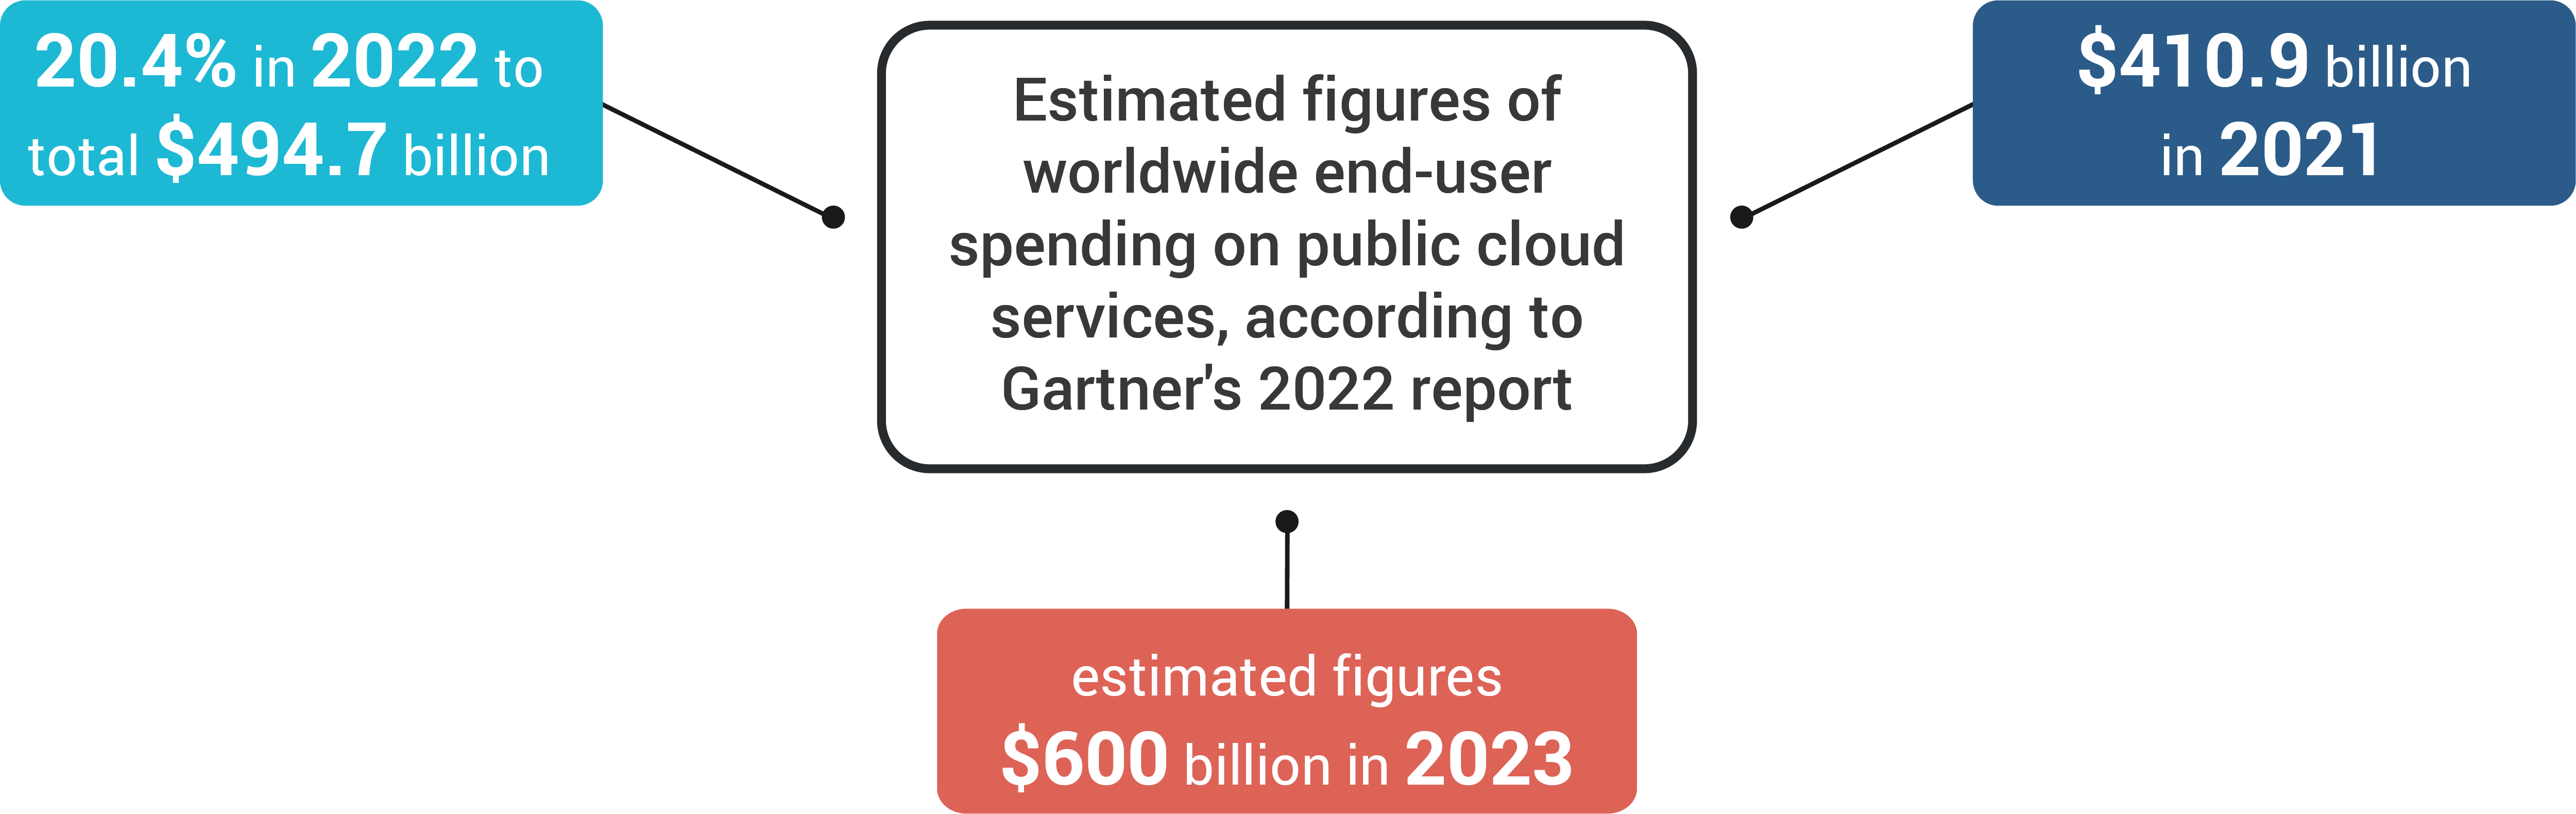 Worldwide end-user spending on public cloud services